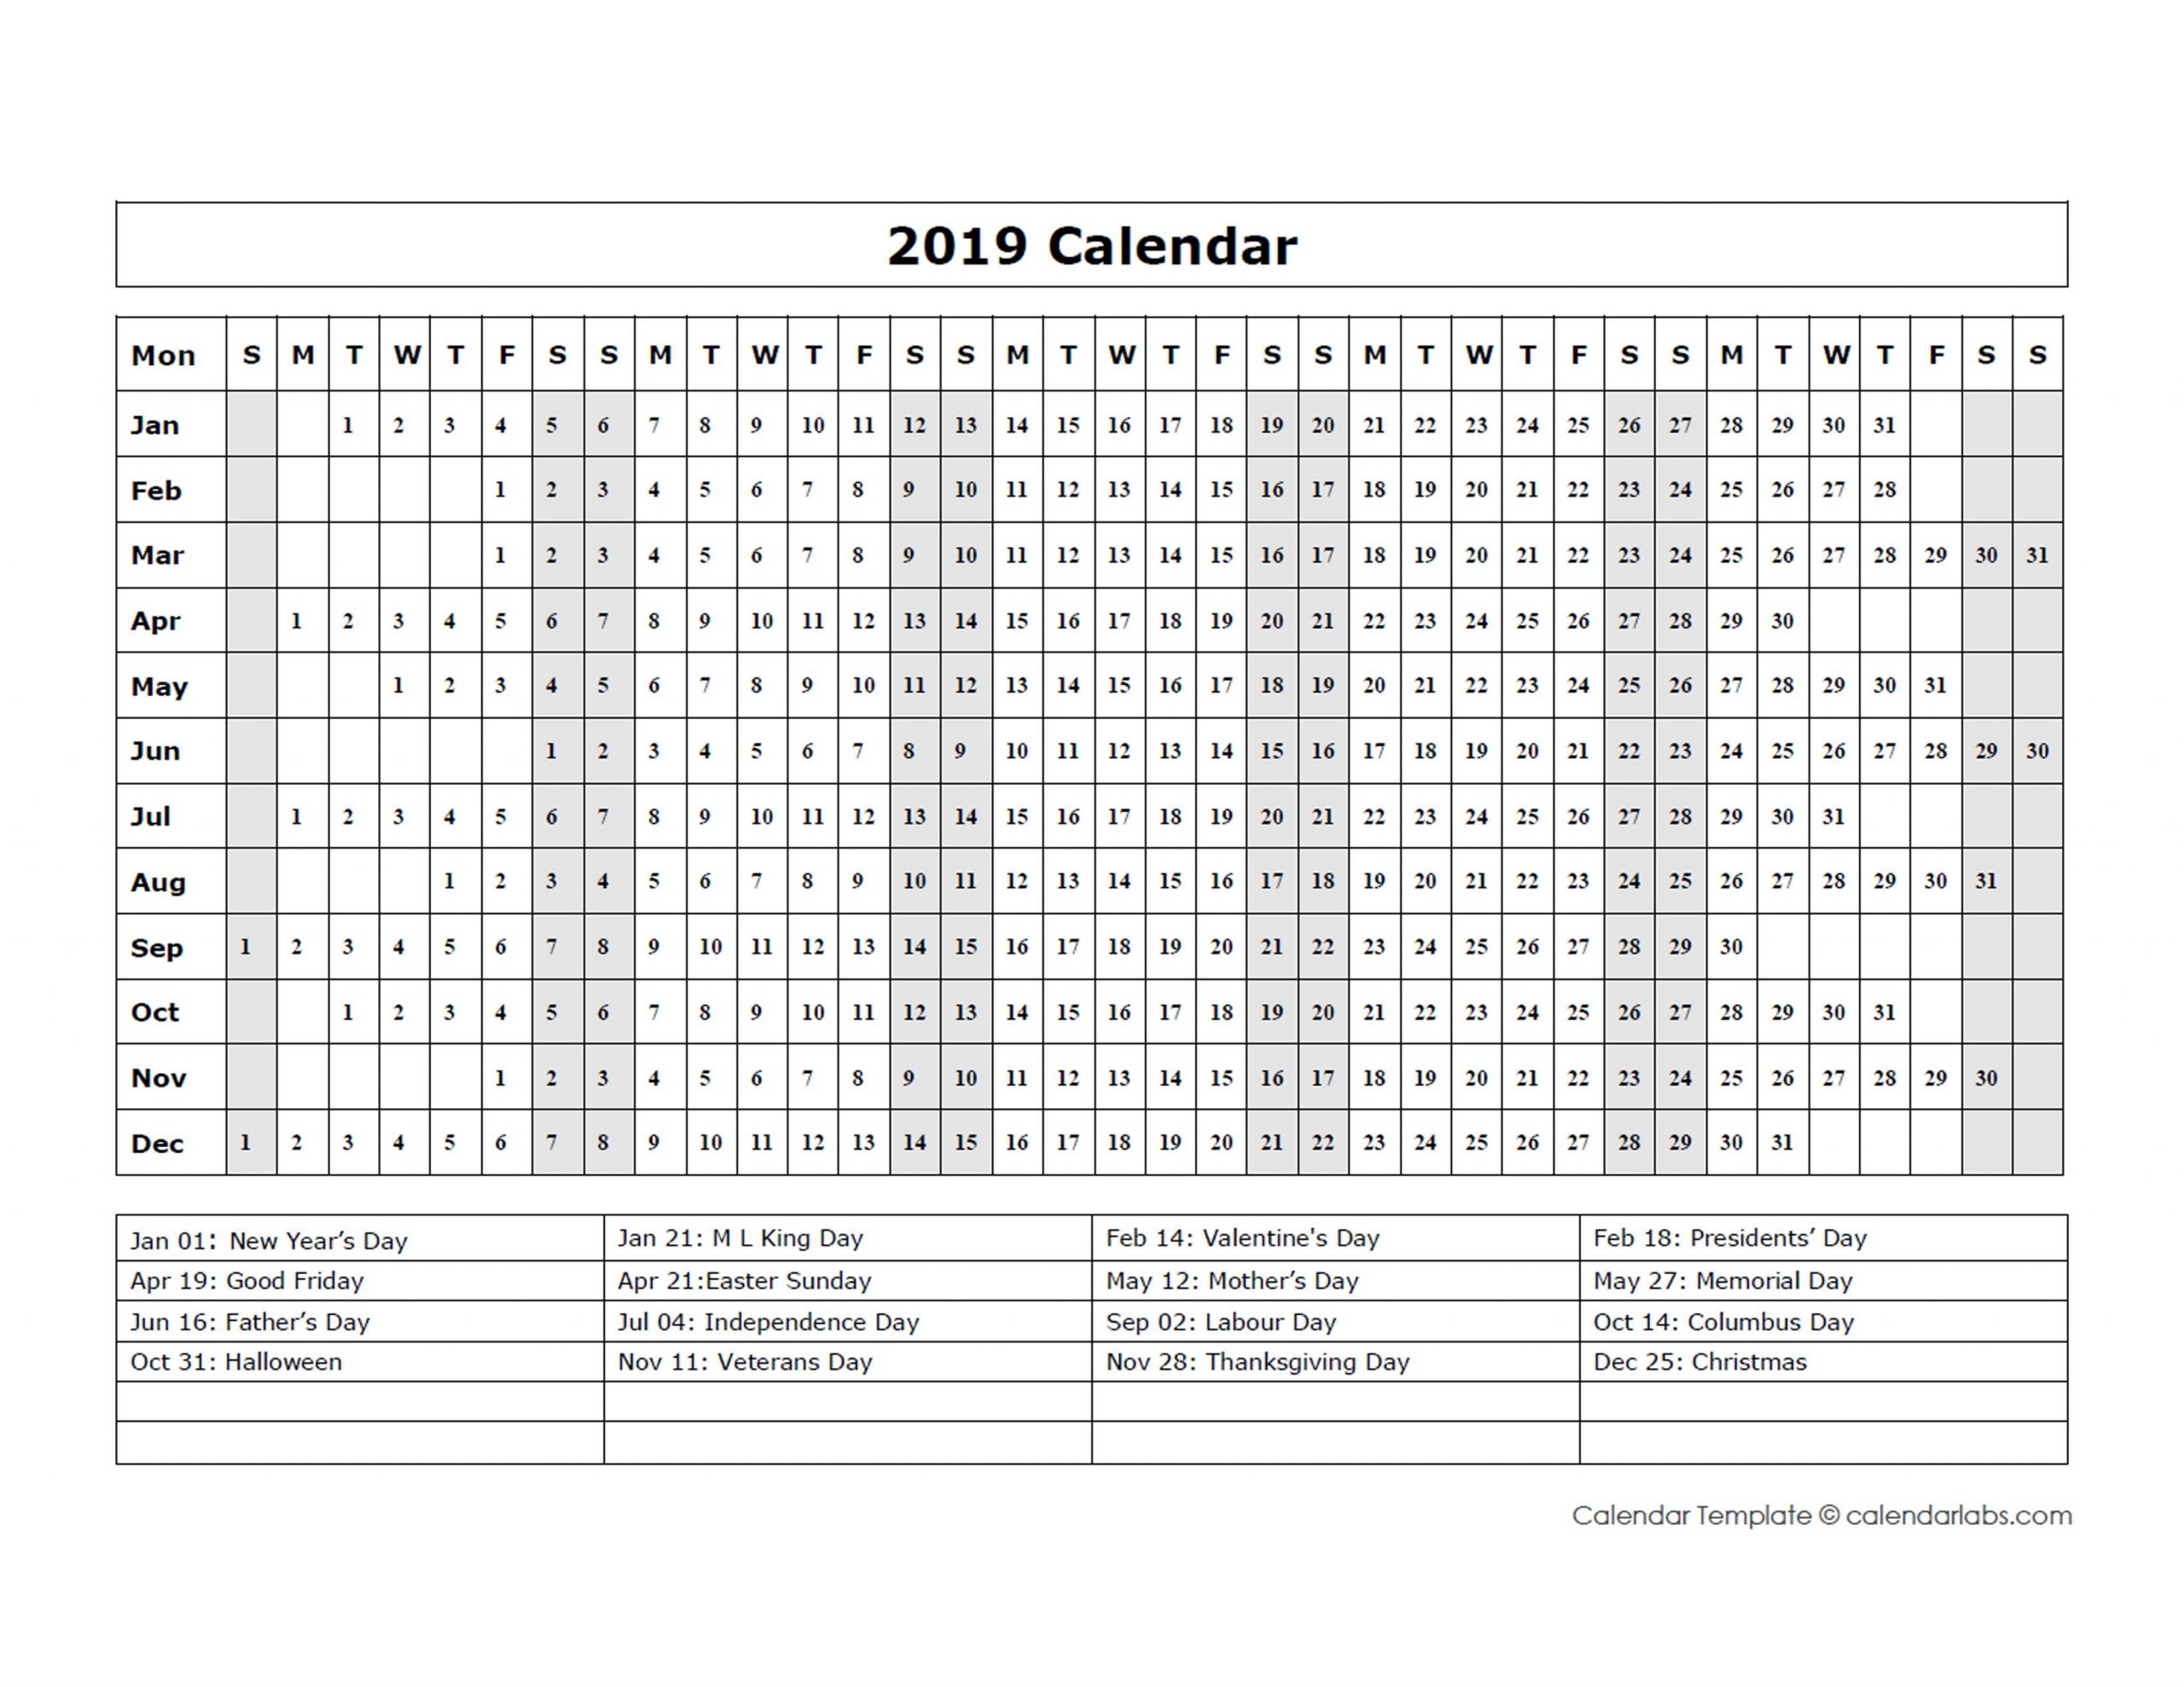 2019 calendar template year at a glance free printable